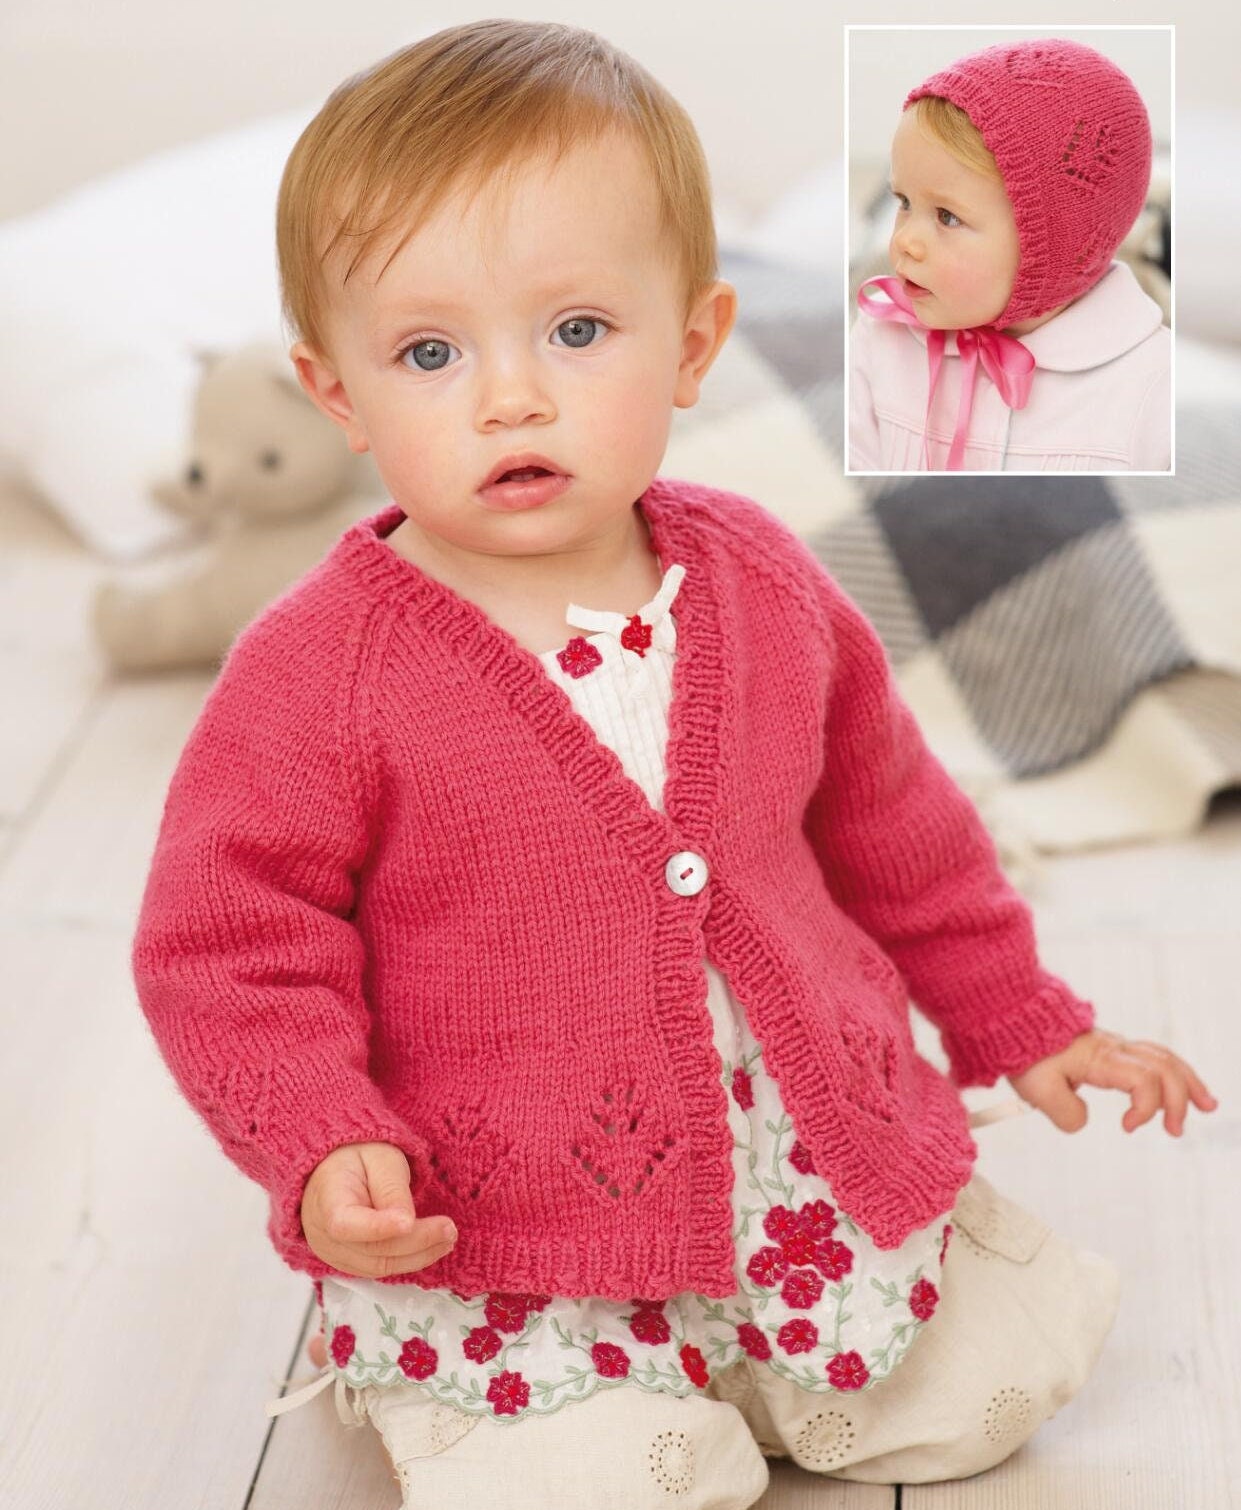 Baby Children's Cardigan and Hat 4 Ply Knitting Pattern - Etsy